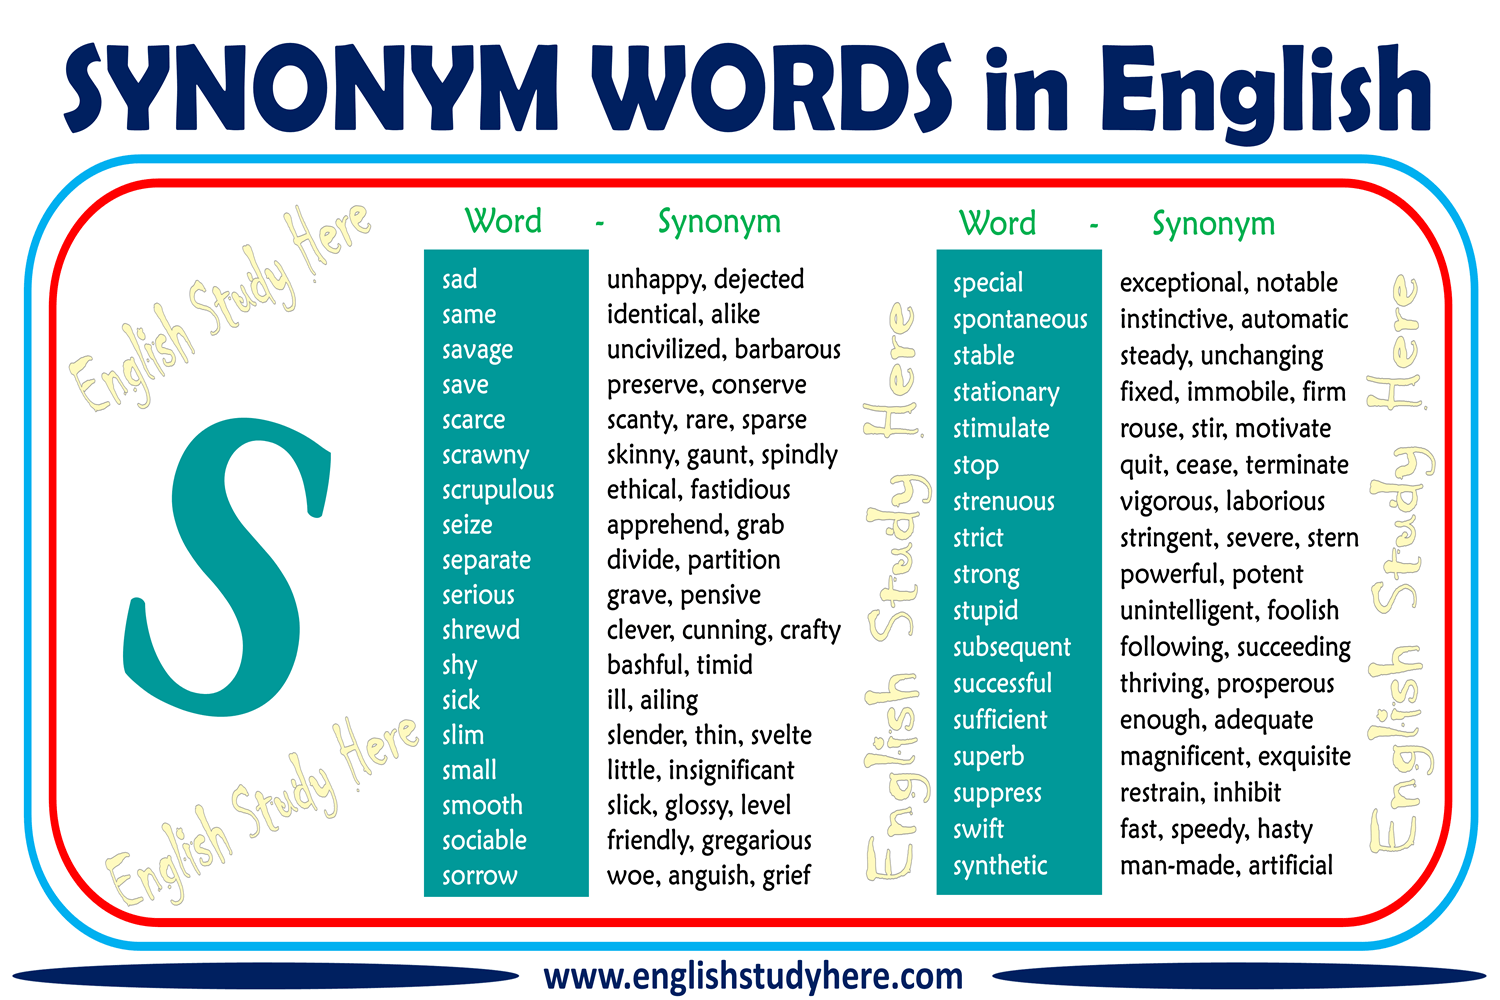 Synonym Words With S in English   English Study Here